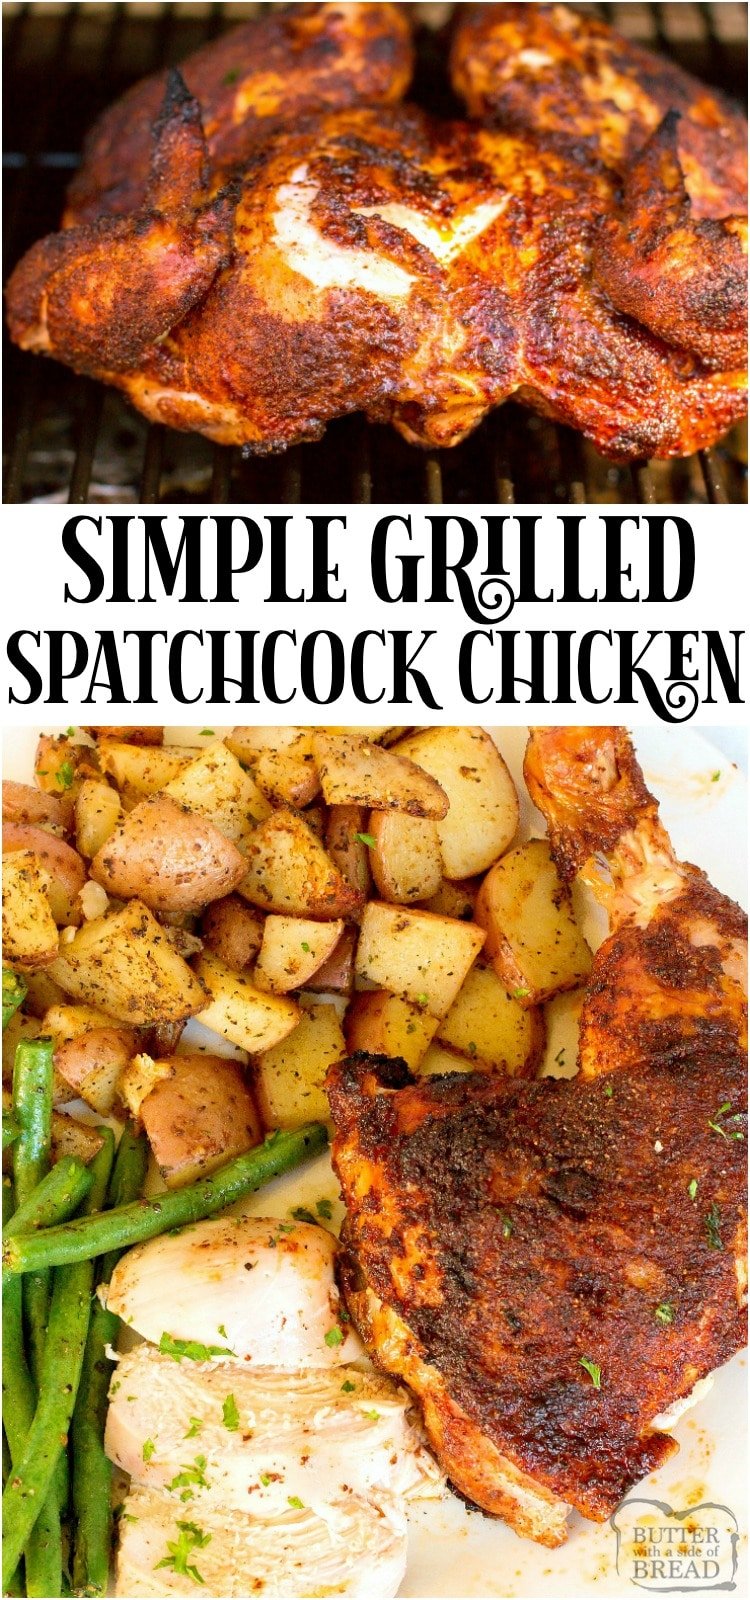 Grilled Spatchcock Chicken Recipe for tender, flavorful chicken that cooks evenly! Shows how to spatchcock a chicken & why it delivers moist chicken with incredible flavor.